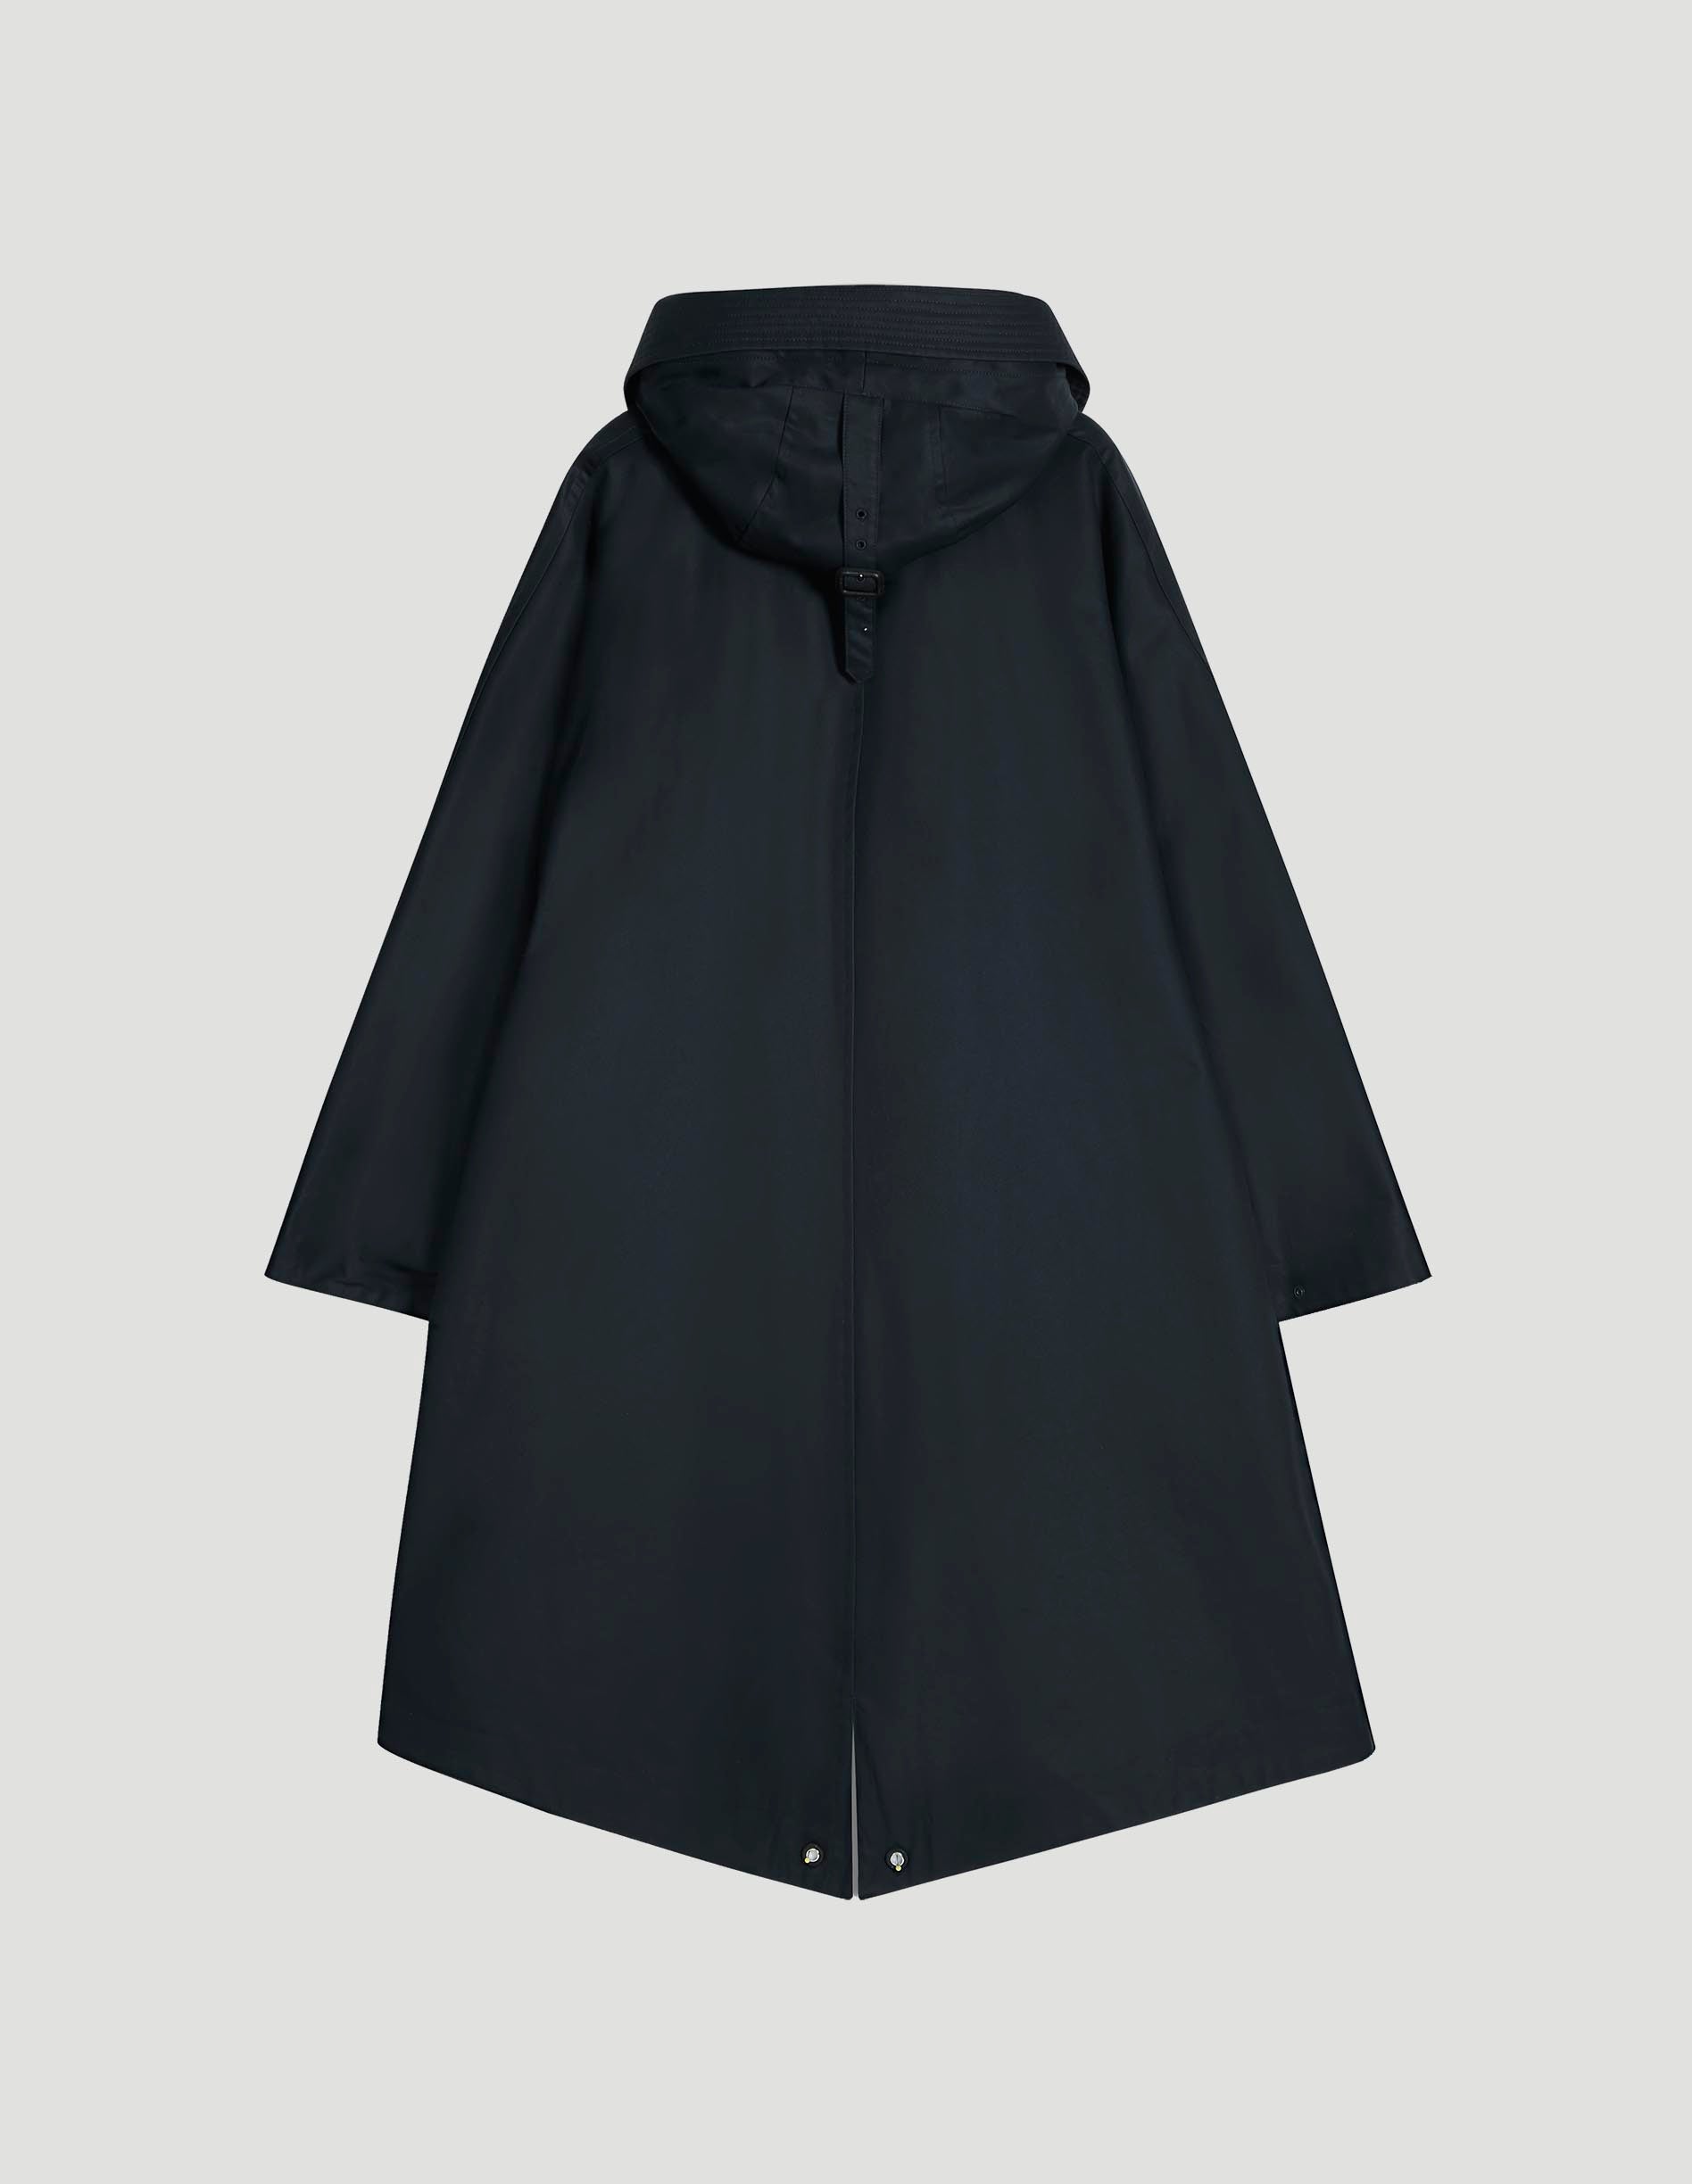 Cape Grenfell Cloth Navy